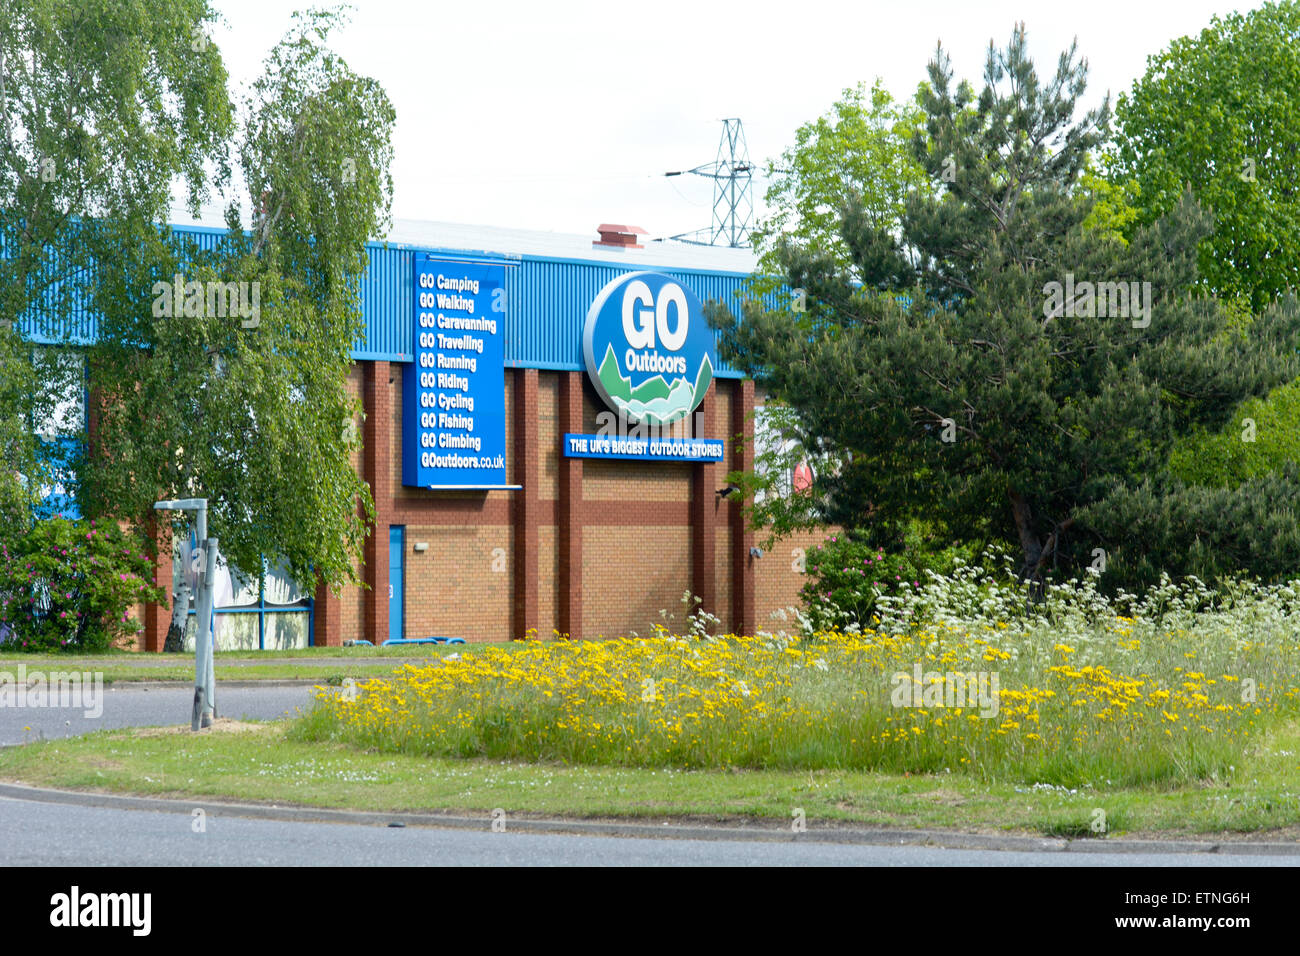 Go Outdoors store in Bedford, Bedfordshire, England Stock Photo